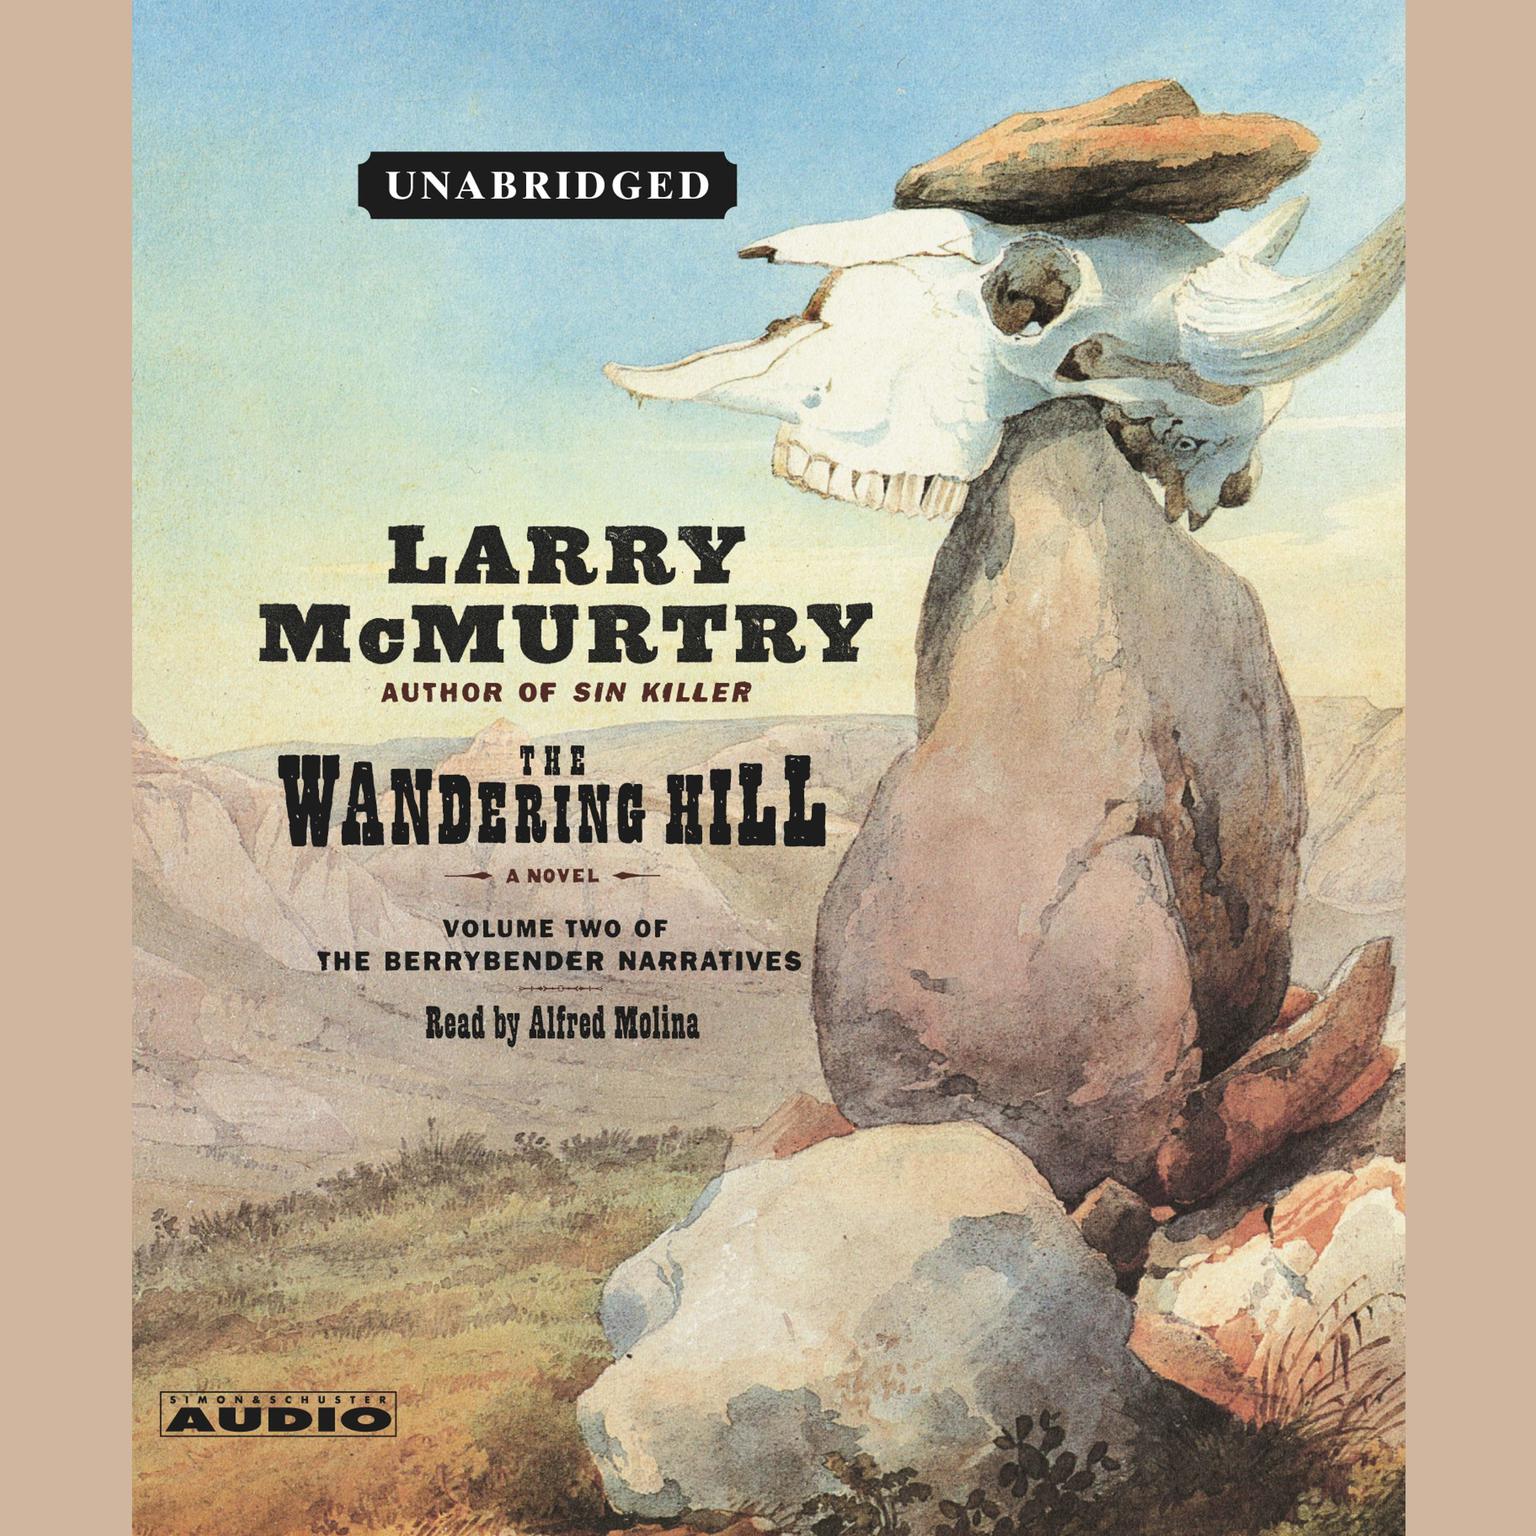 The Wandering Hill: A Novel Audiobook, by Larry McMurtry